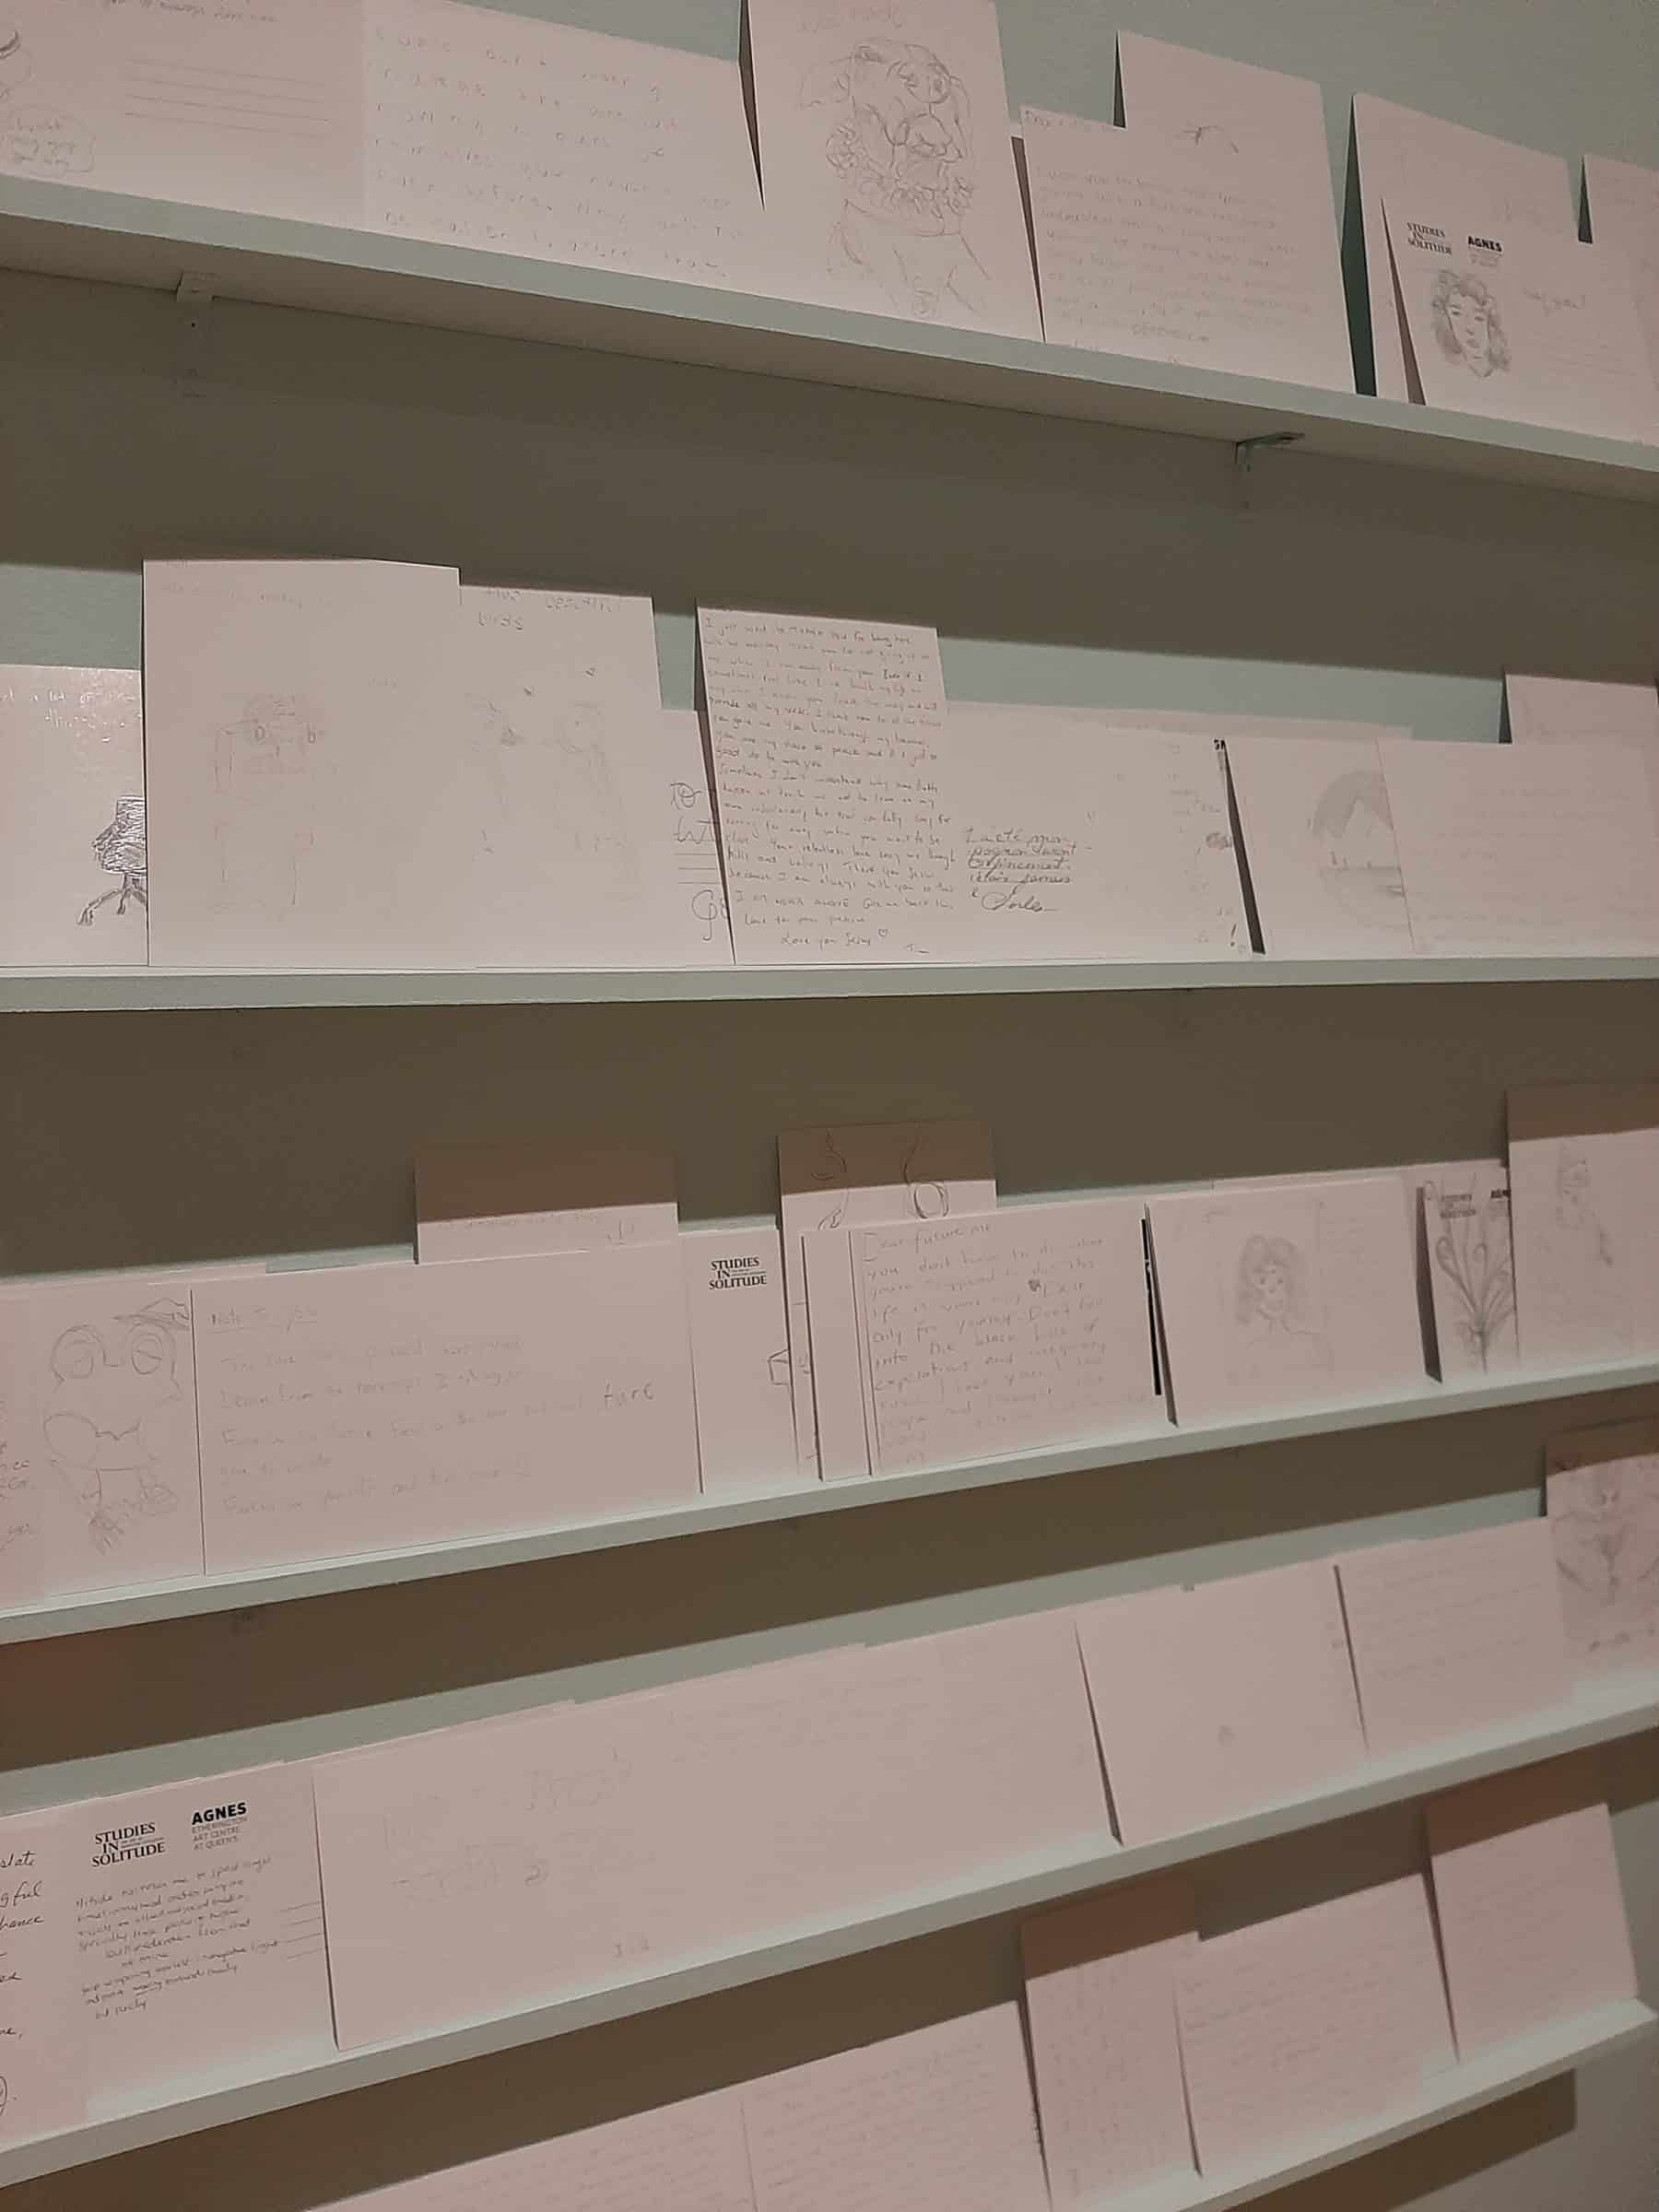 View of shelves with white handwritten postcards, some with pencil drawings, against a light blue wall.